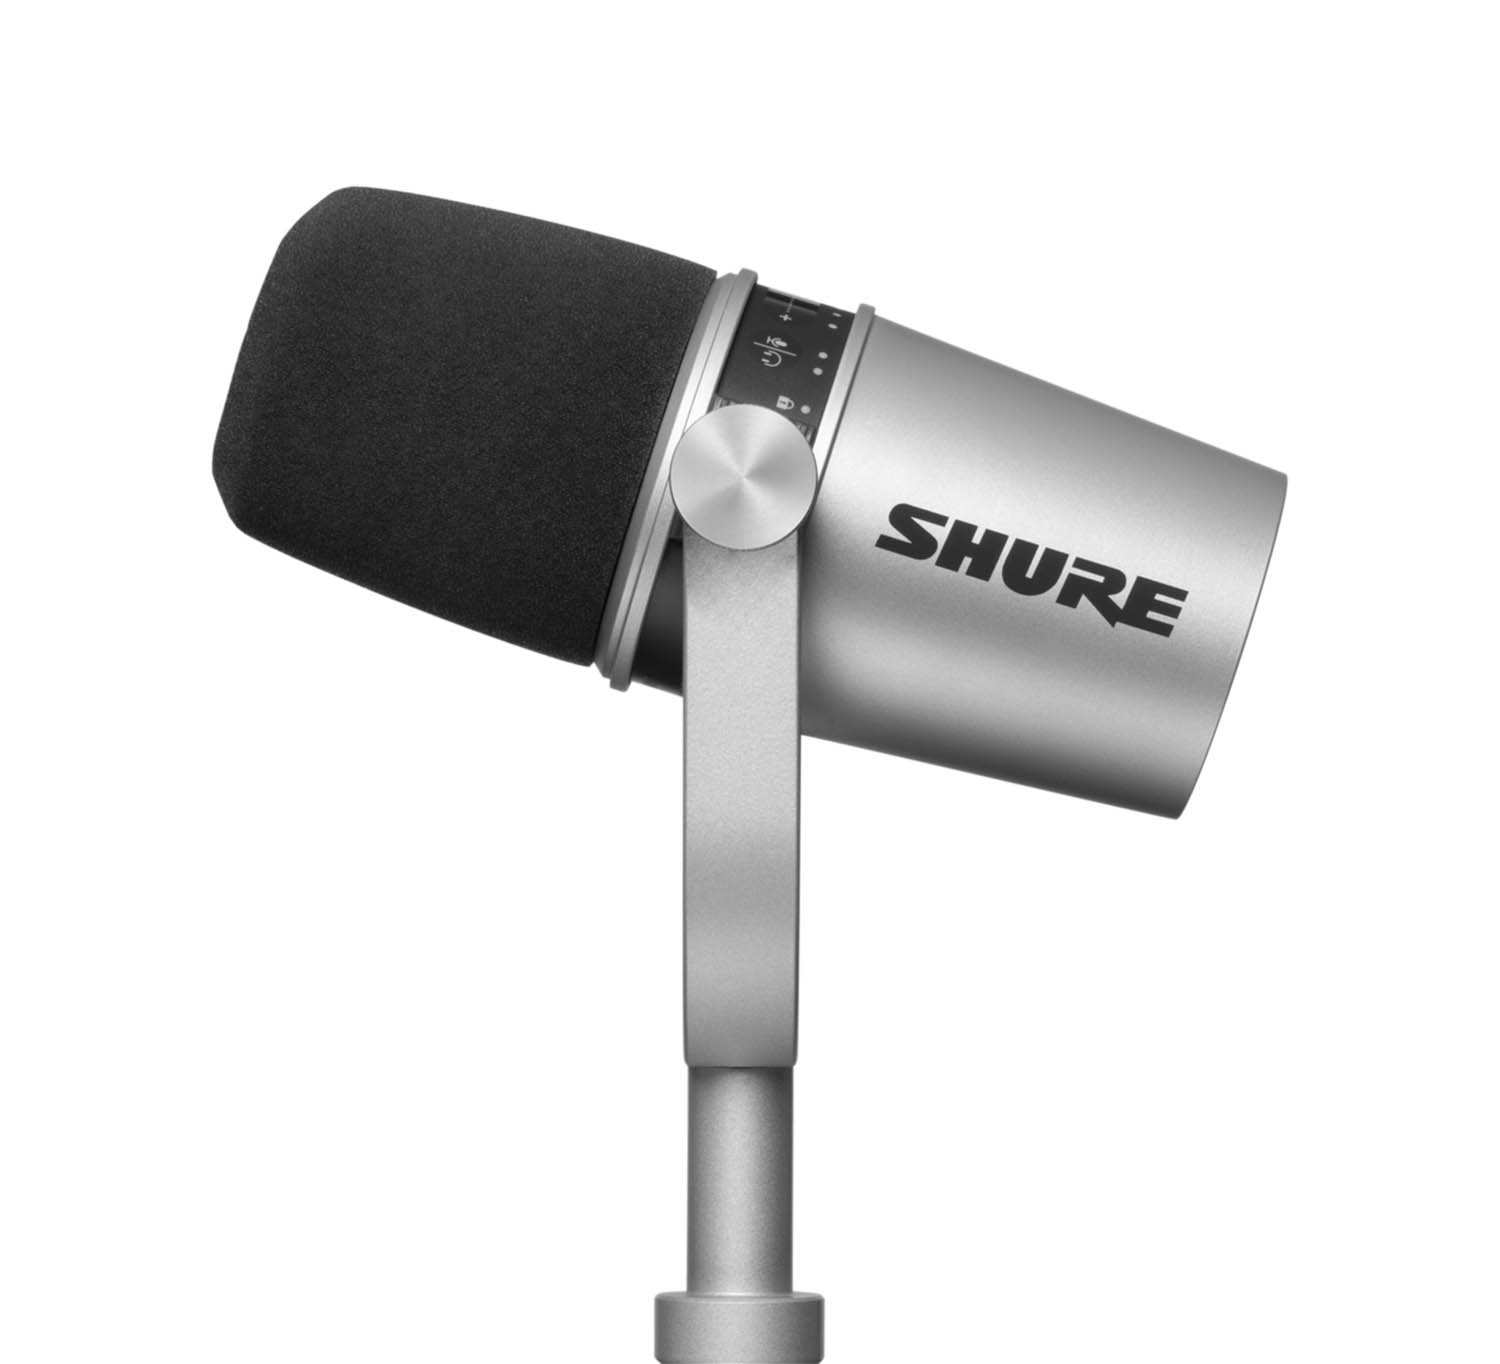 Shure Podcast Package with SRH440A Studio Headphones and MV7-S USB Podcast Microphone - Hollywood DJ